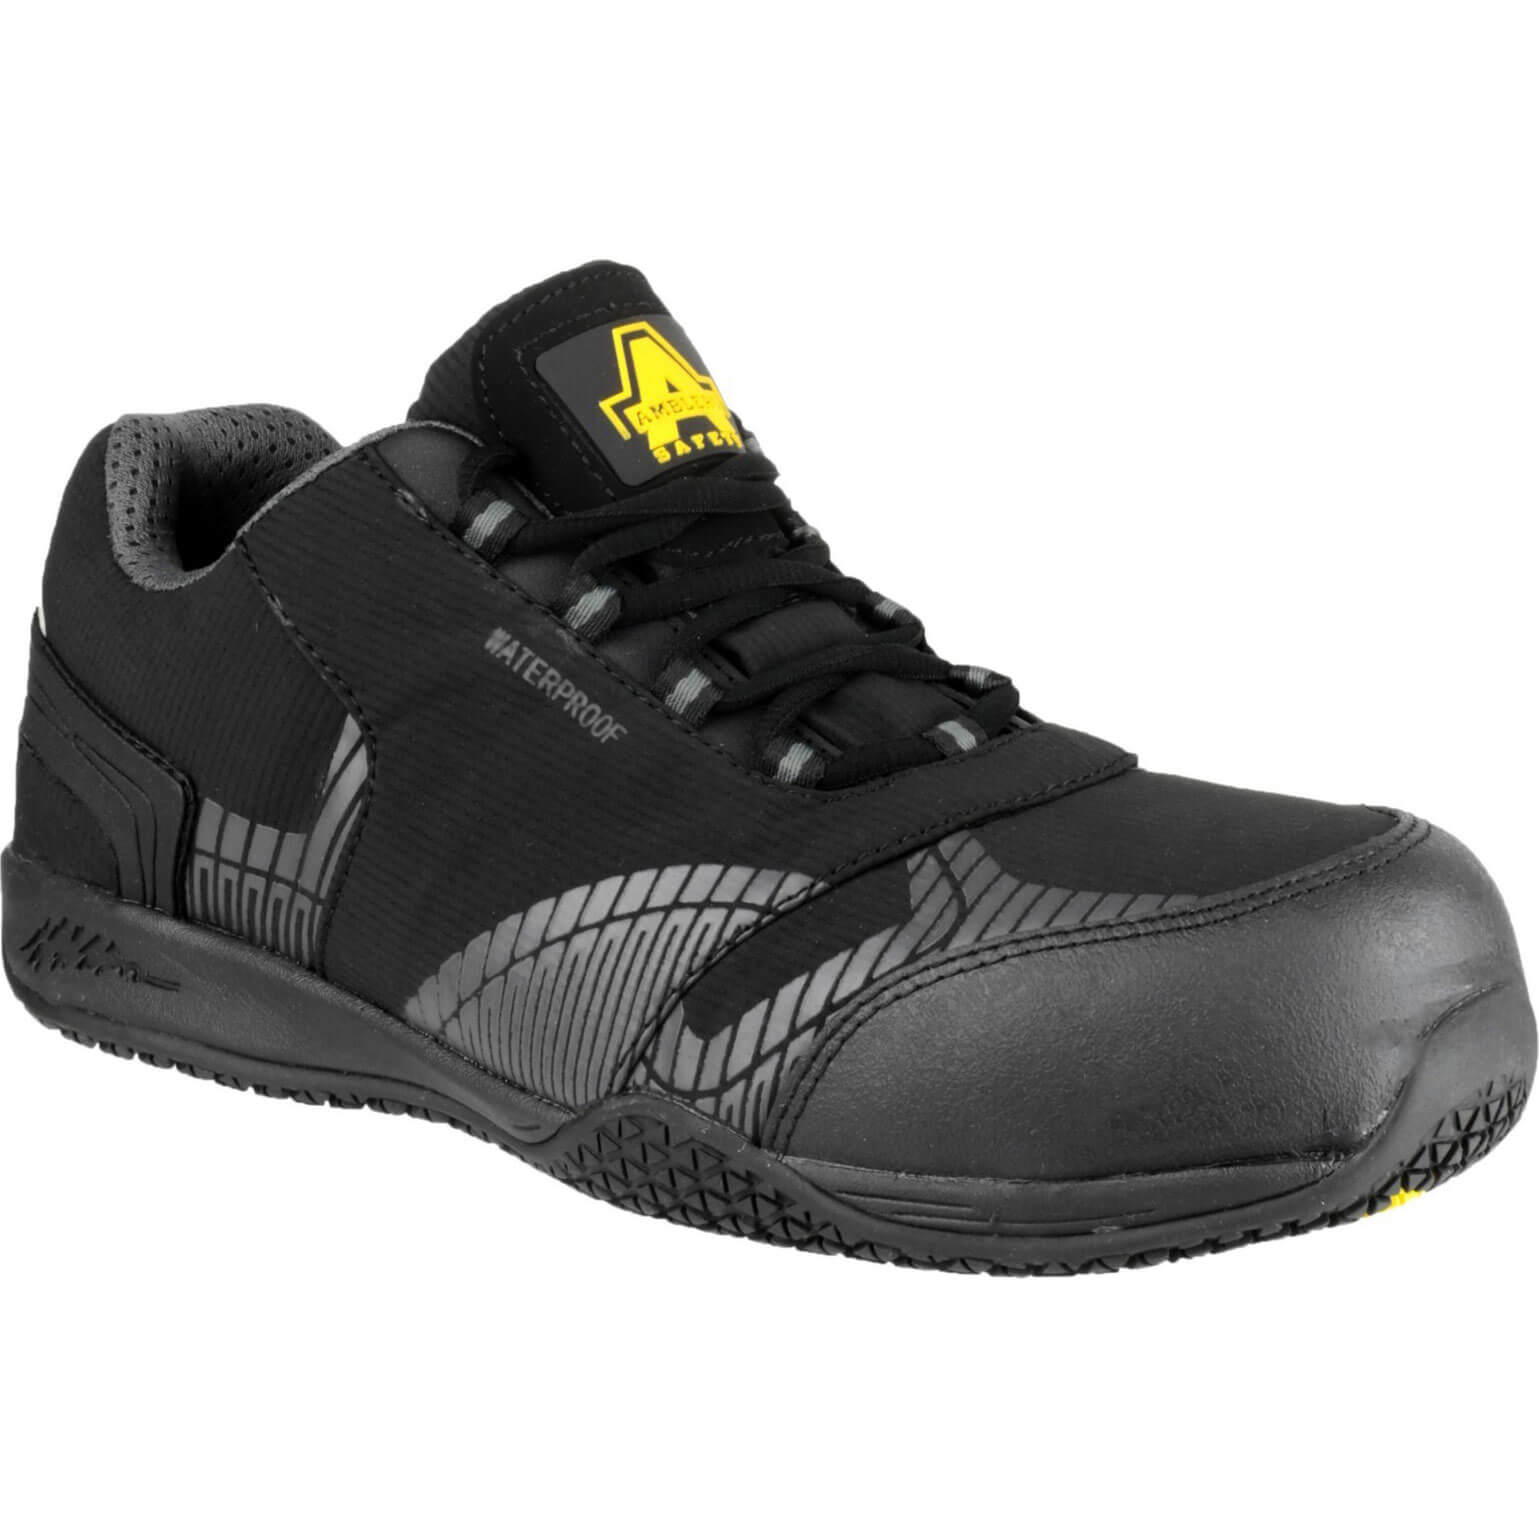 Image of Amblers Safety FS29C Waterproof Metal Free Non Leather Safety Trainer Black Size 6